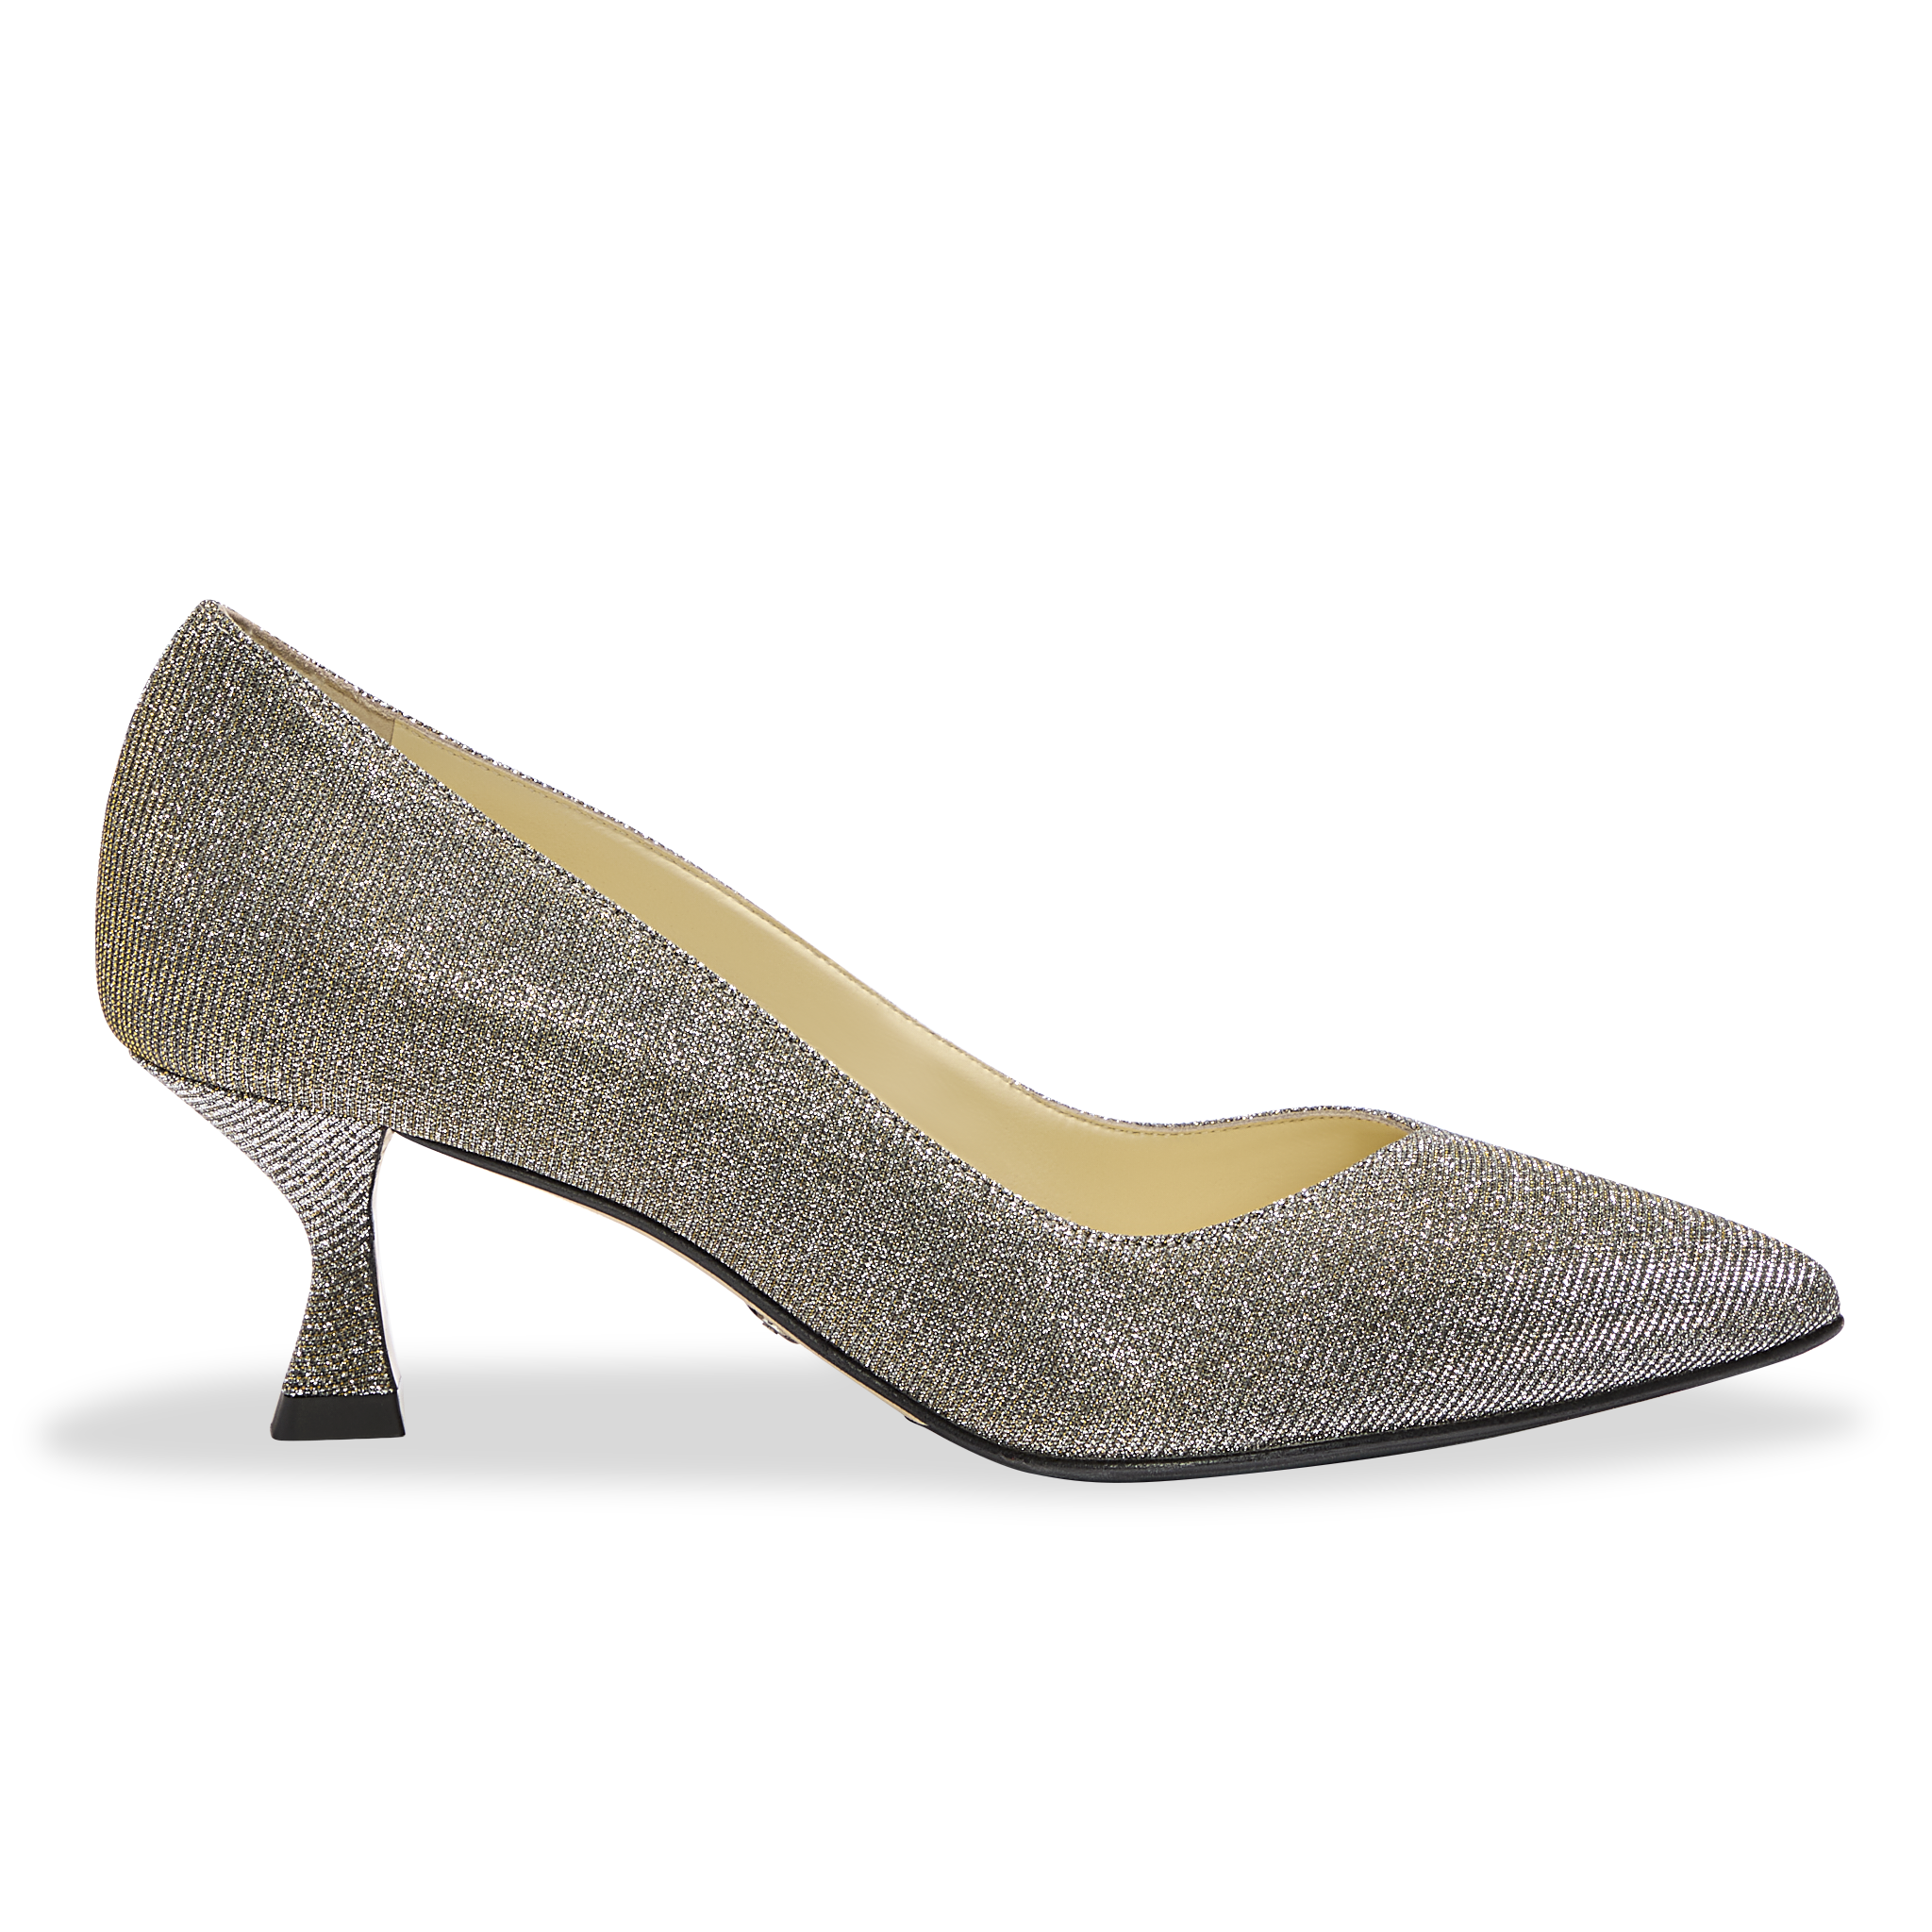 Buy the Lotus ladies' Love court shoe online at www.lotusshoes.co.uk.